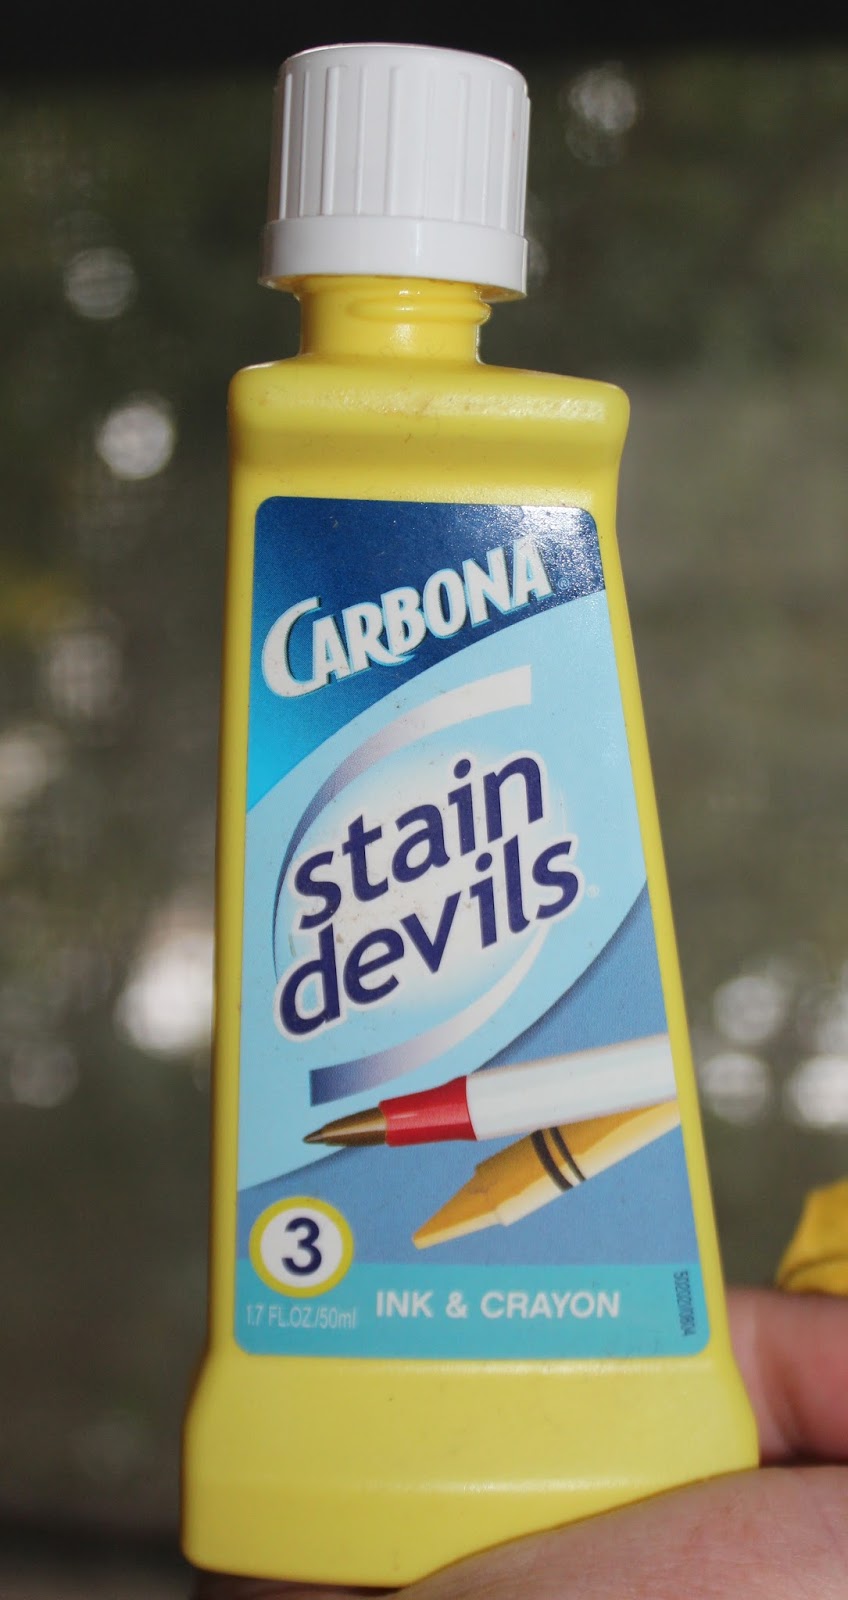 PLANET OF THE DOLLS: A Review of My Favourite Stain Remover: Stain Devils  by Carbona